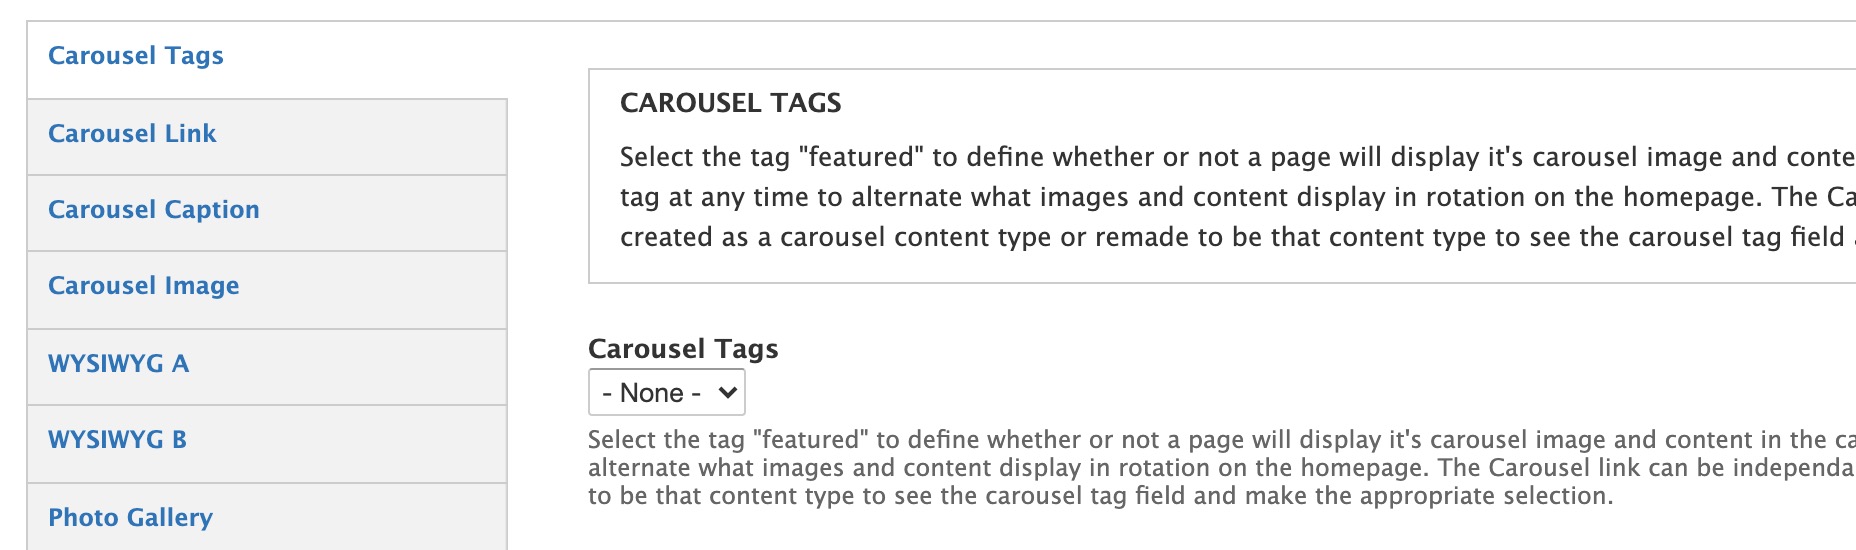 carousel tag selection field